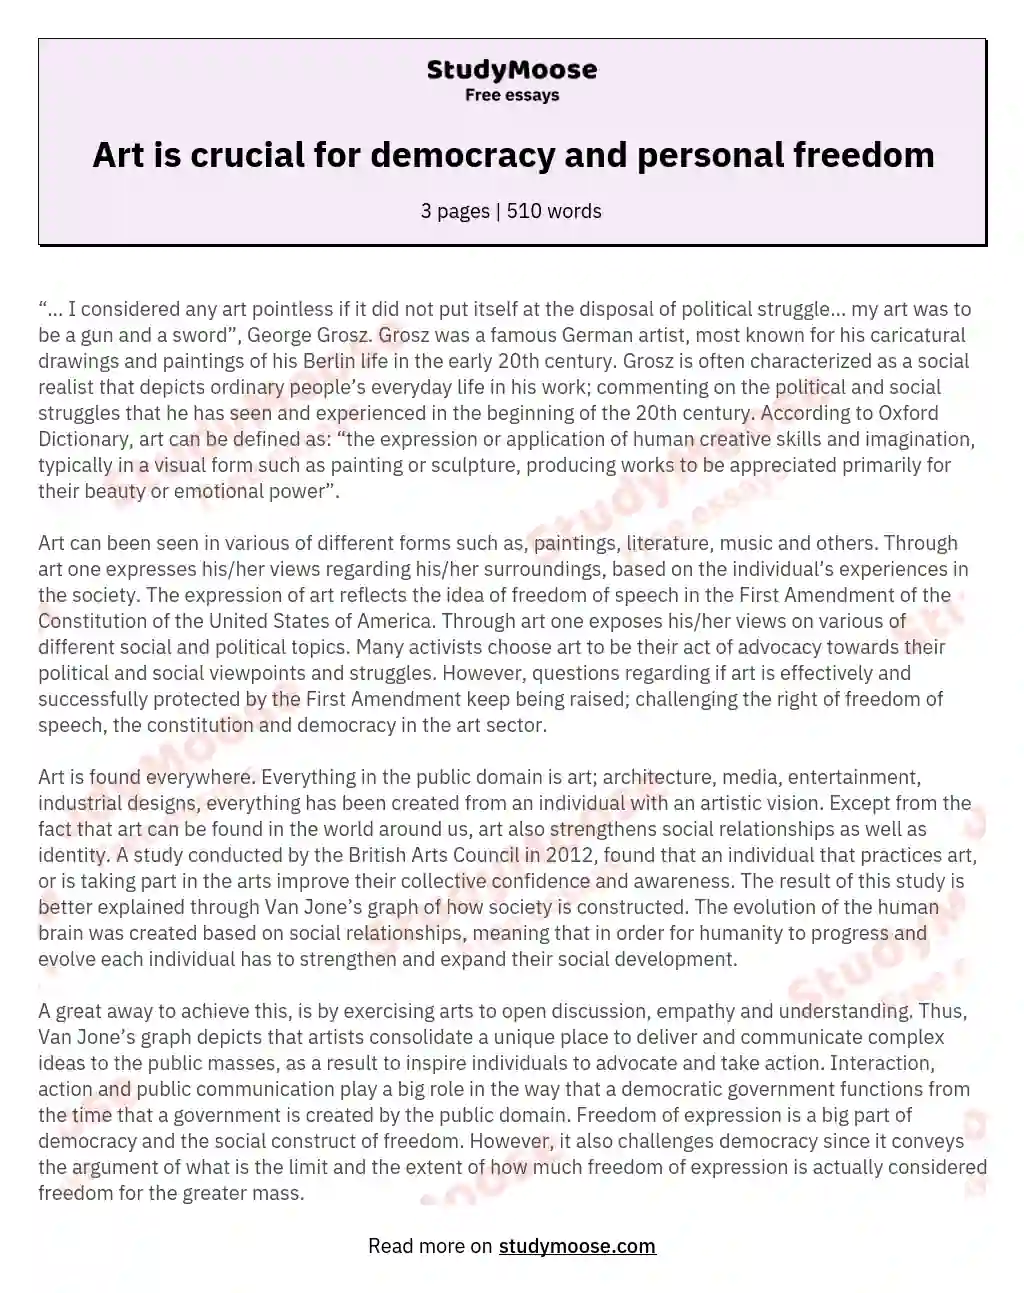 Art is crucial for democracy and personal freedom essay